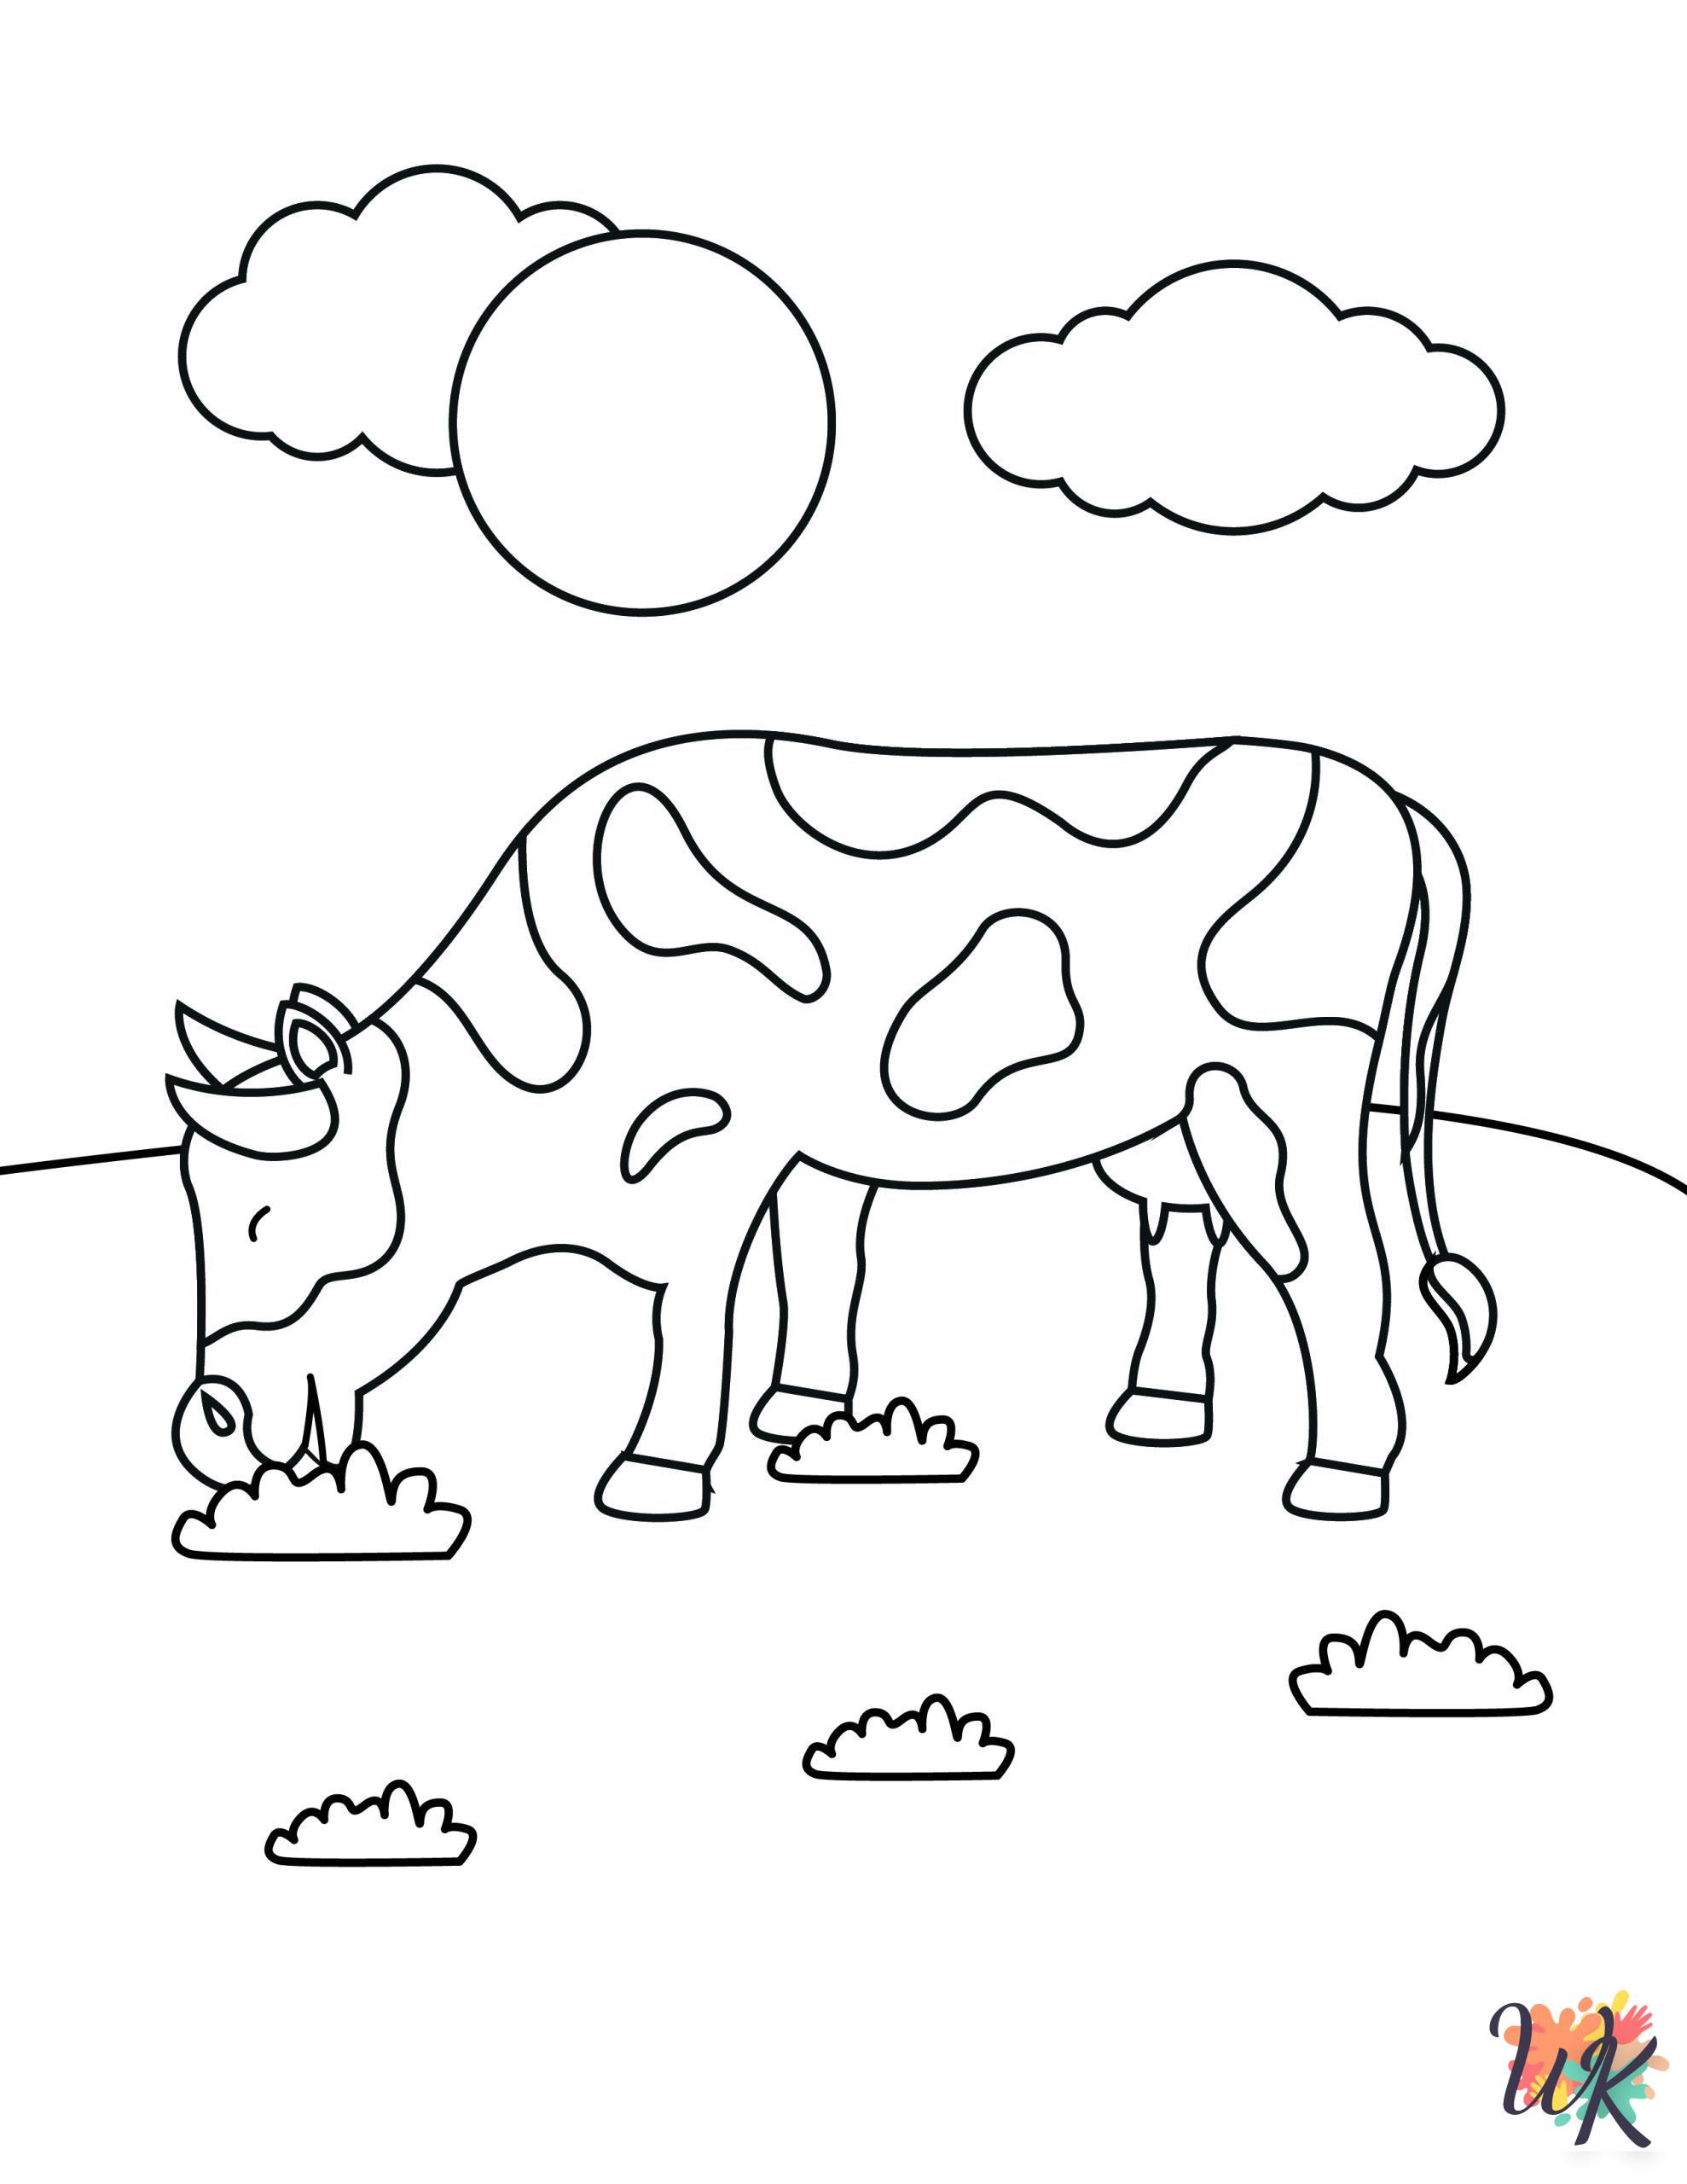 Cow free coloring pages